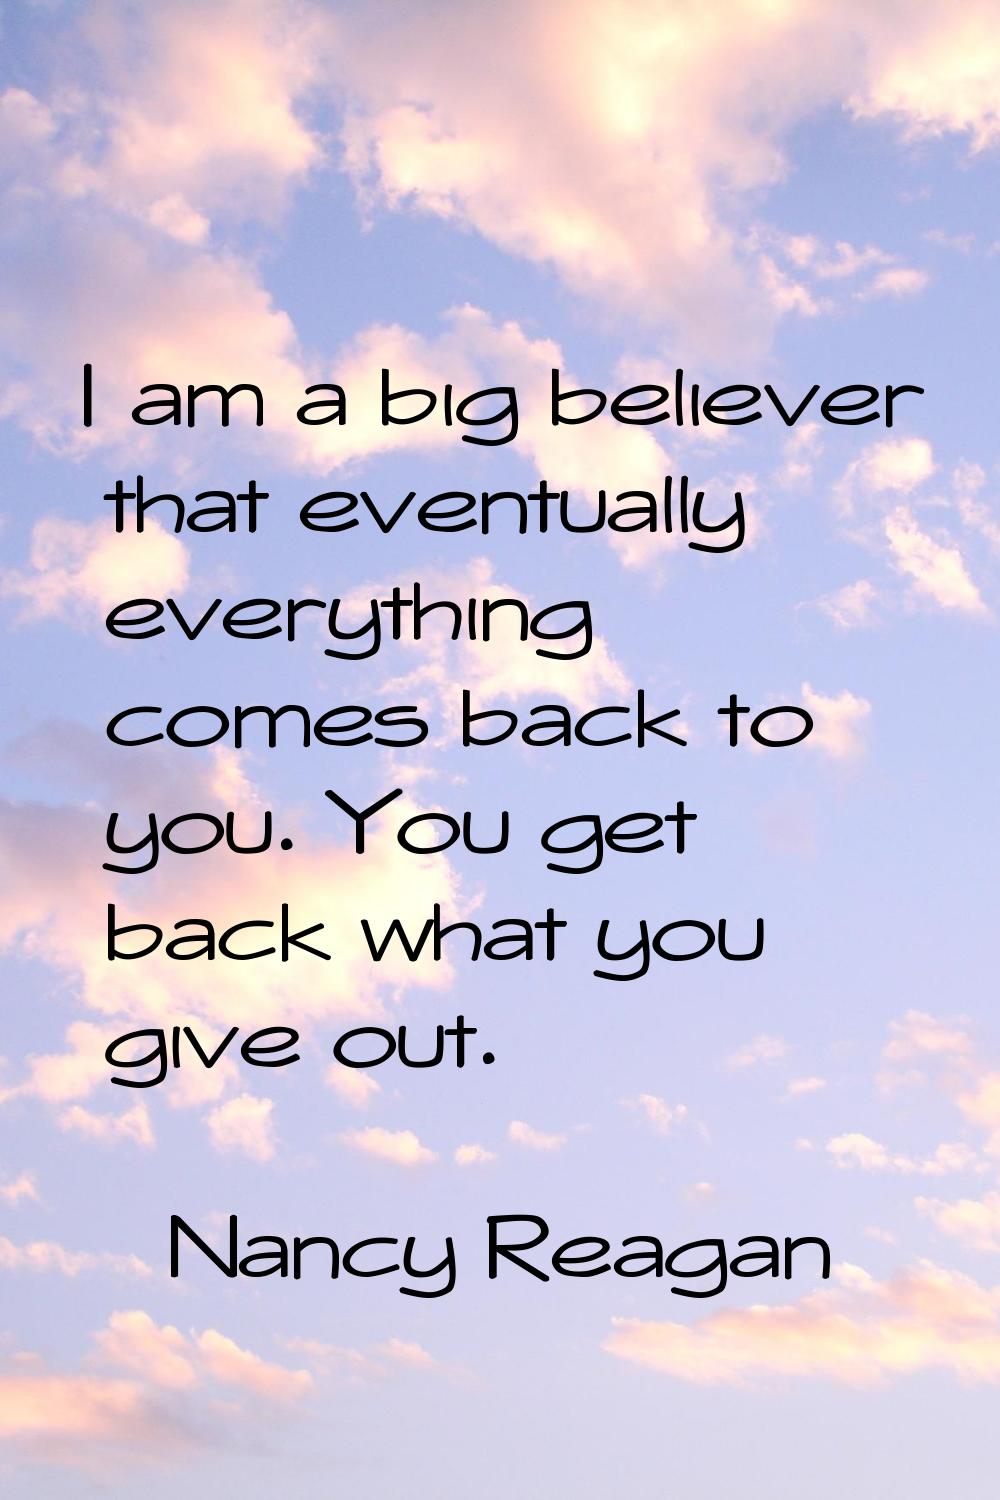 I am a big believer that eventually everything comes back to you. You get back what you give out.